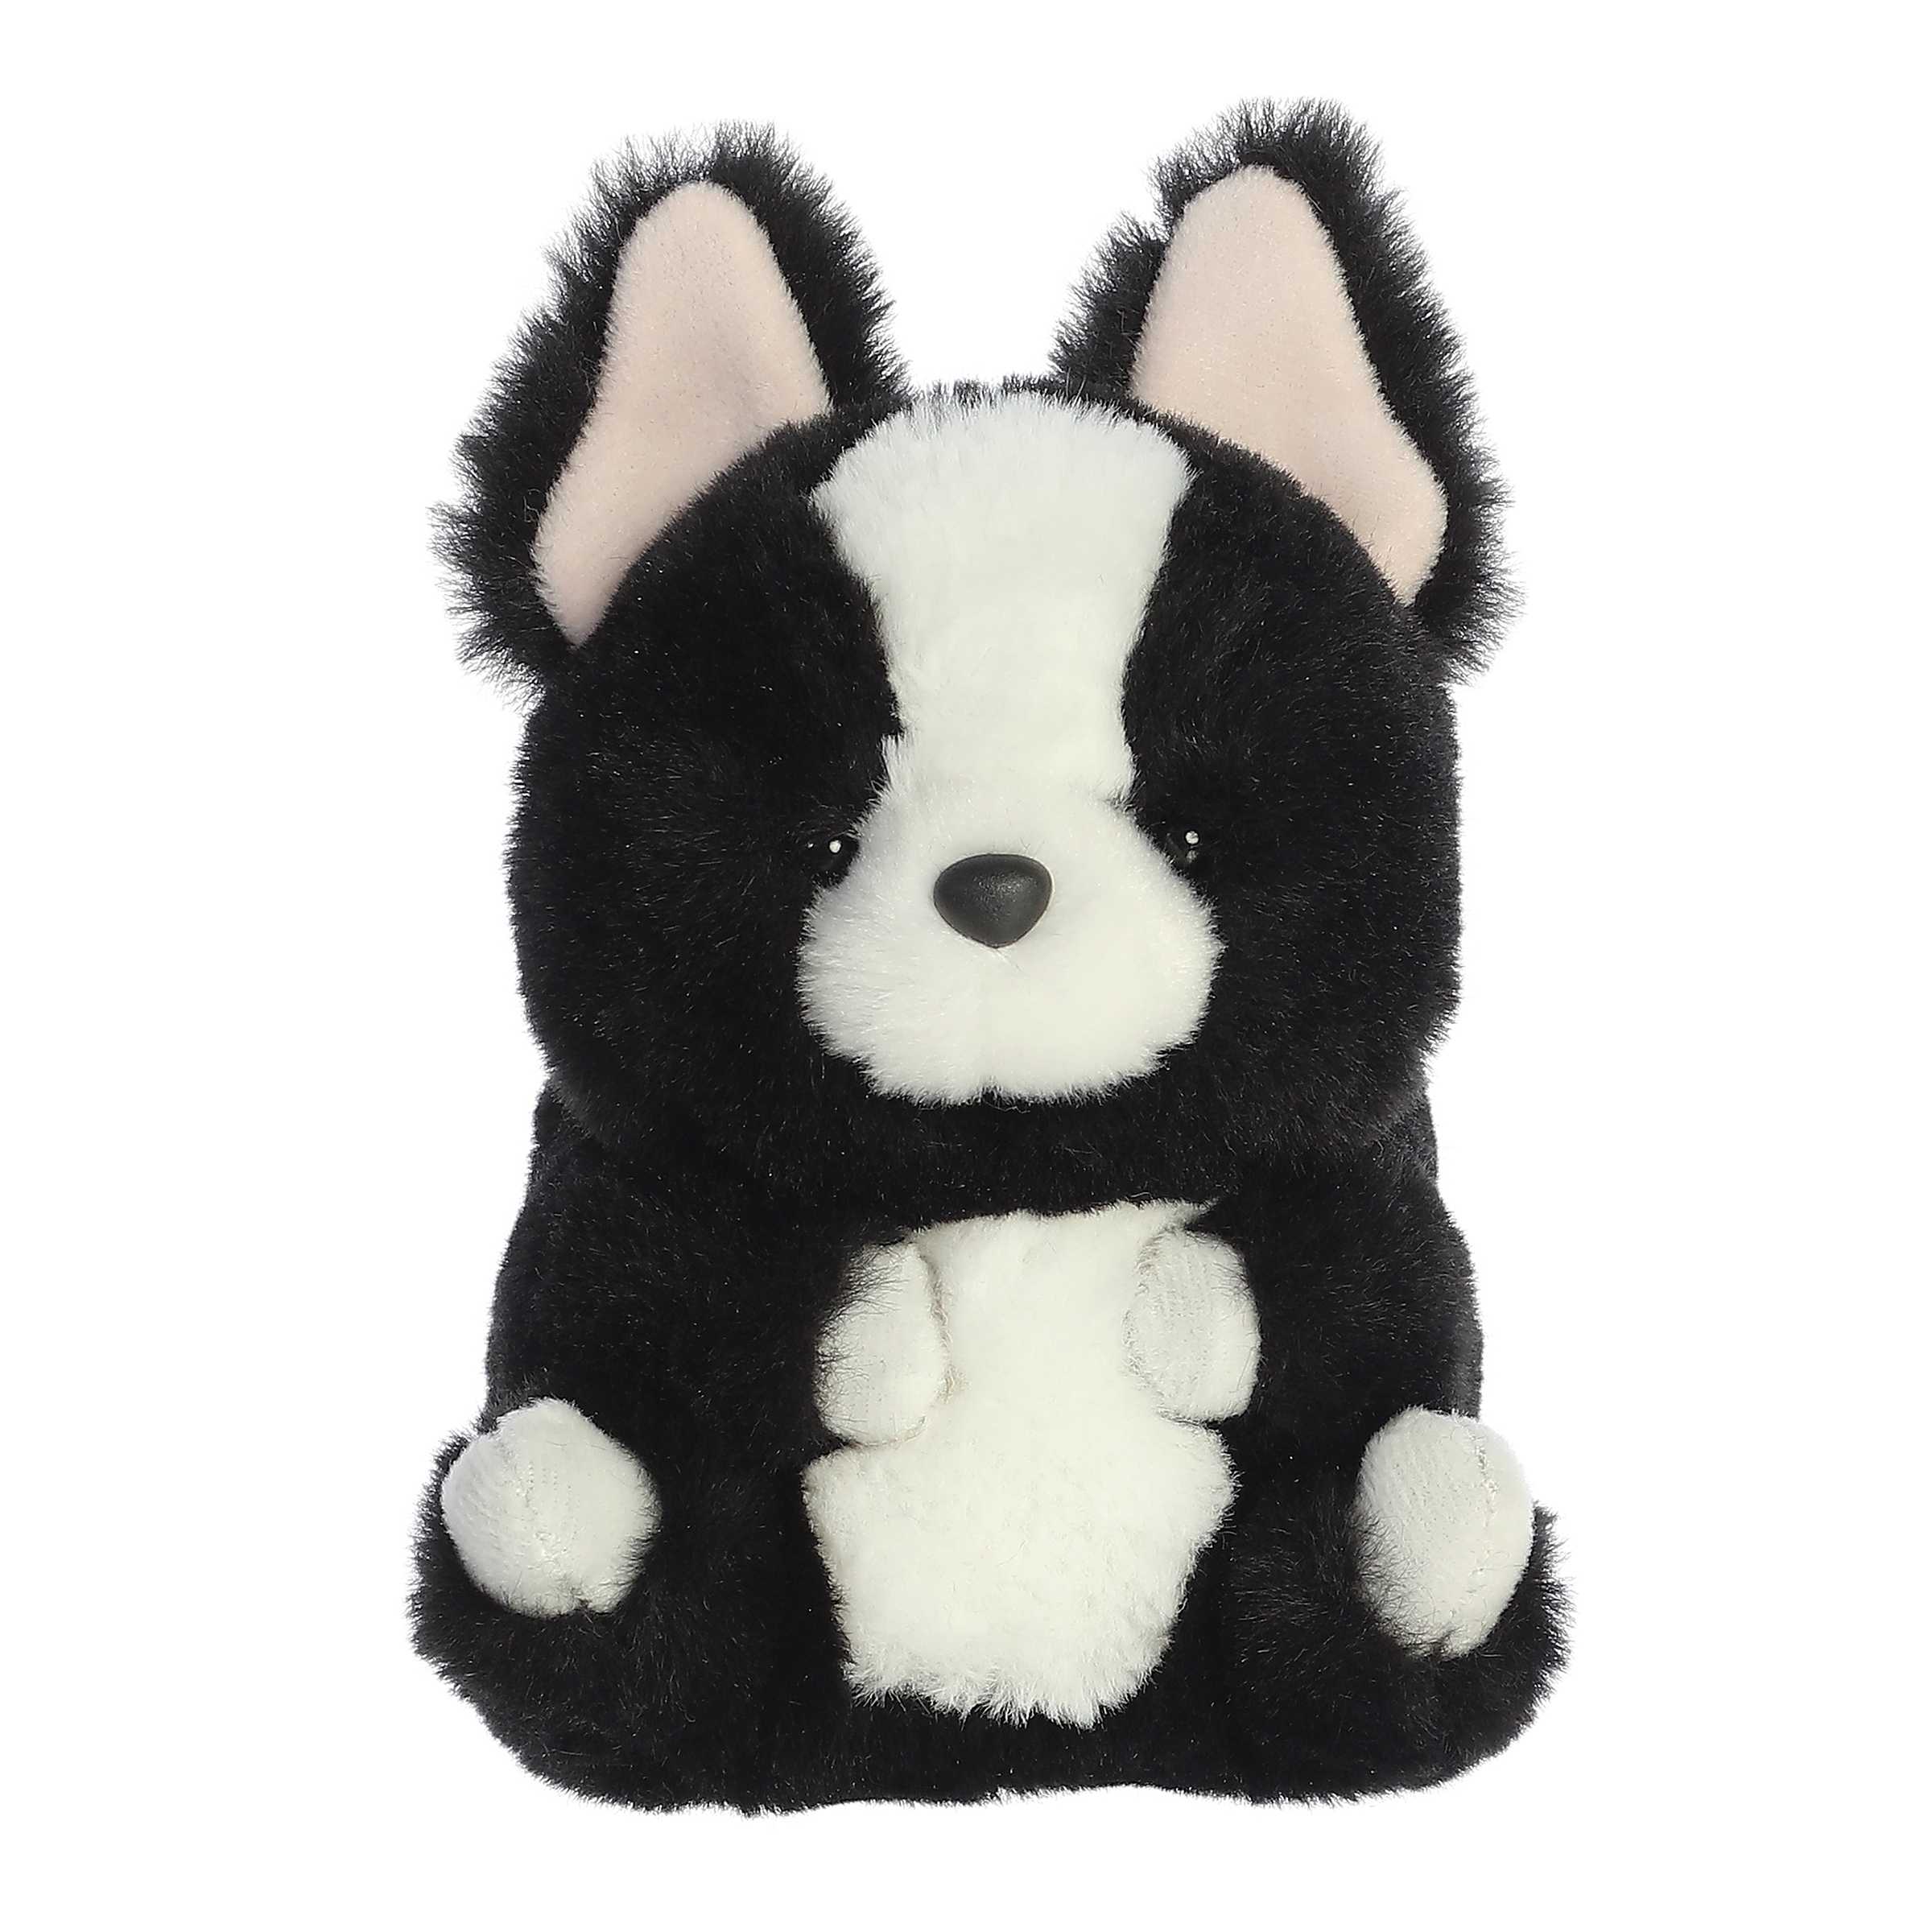 Lifelike French Bulldog plush with bat ears and affectionate eyes, crafted with high-quality materials, by Aurora plush.